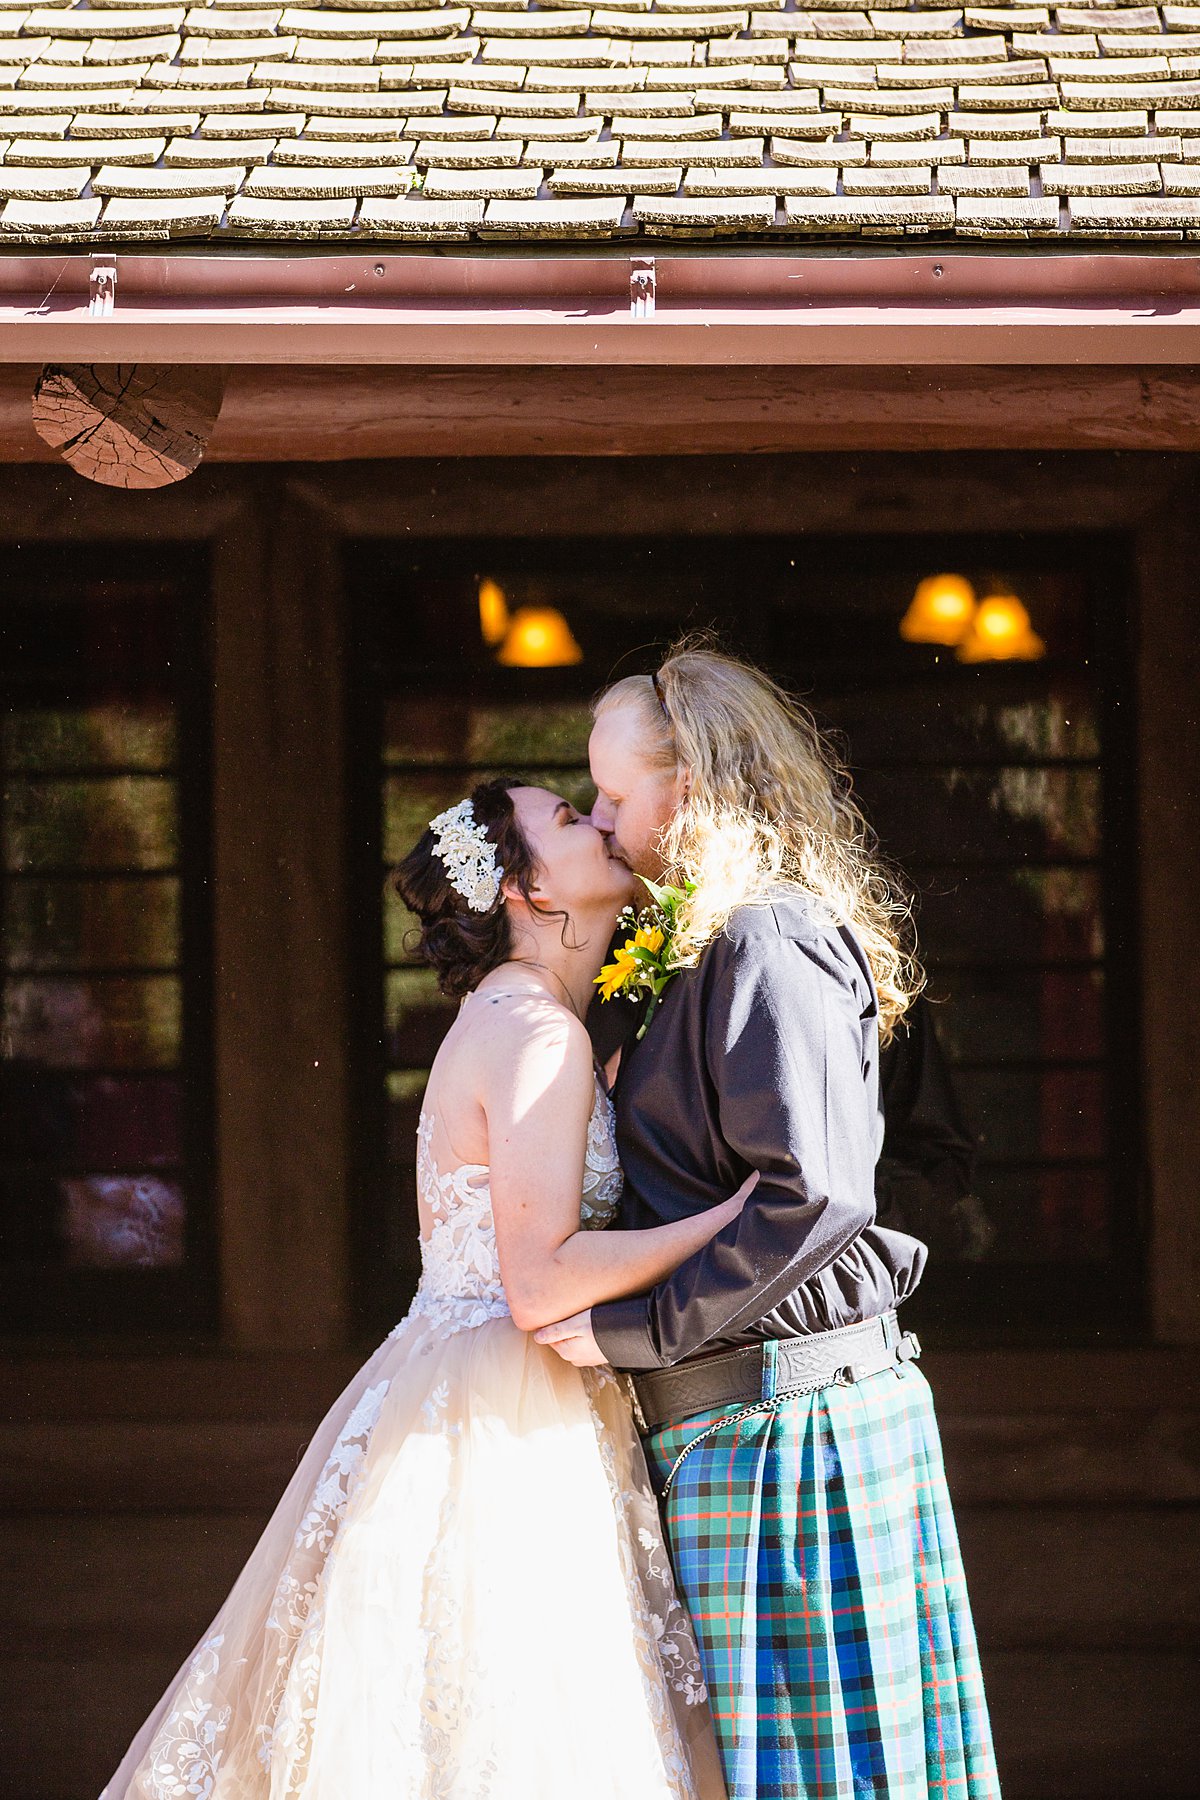 Bride and groom share their first kiss at Riordan Mansion by PMA Photography.